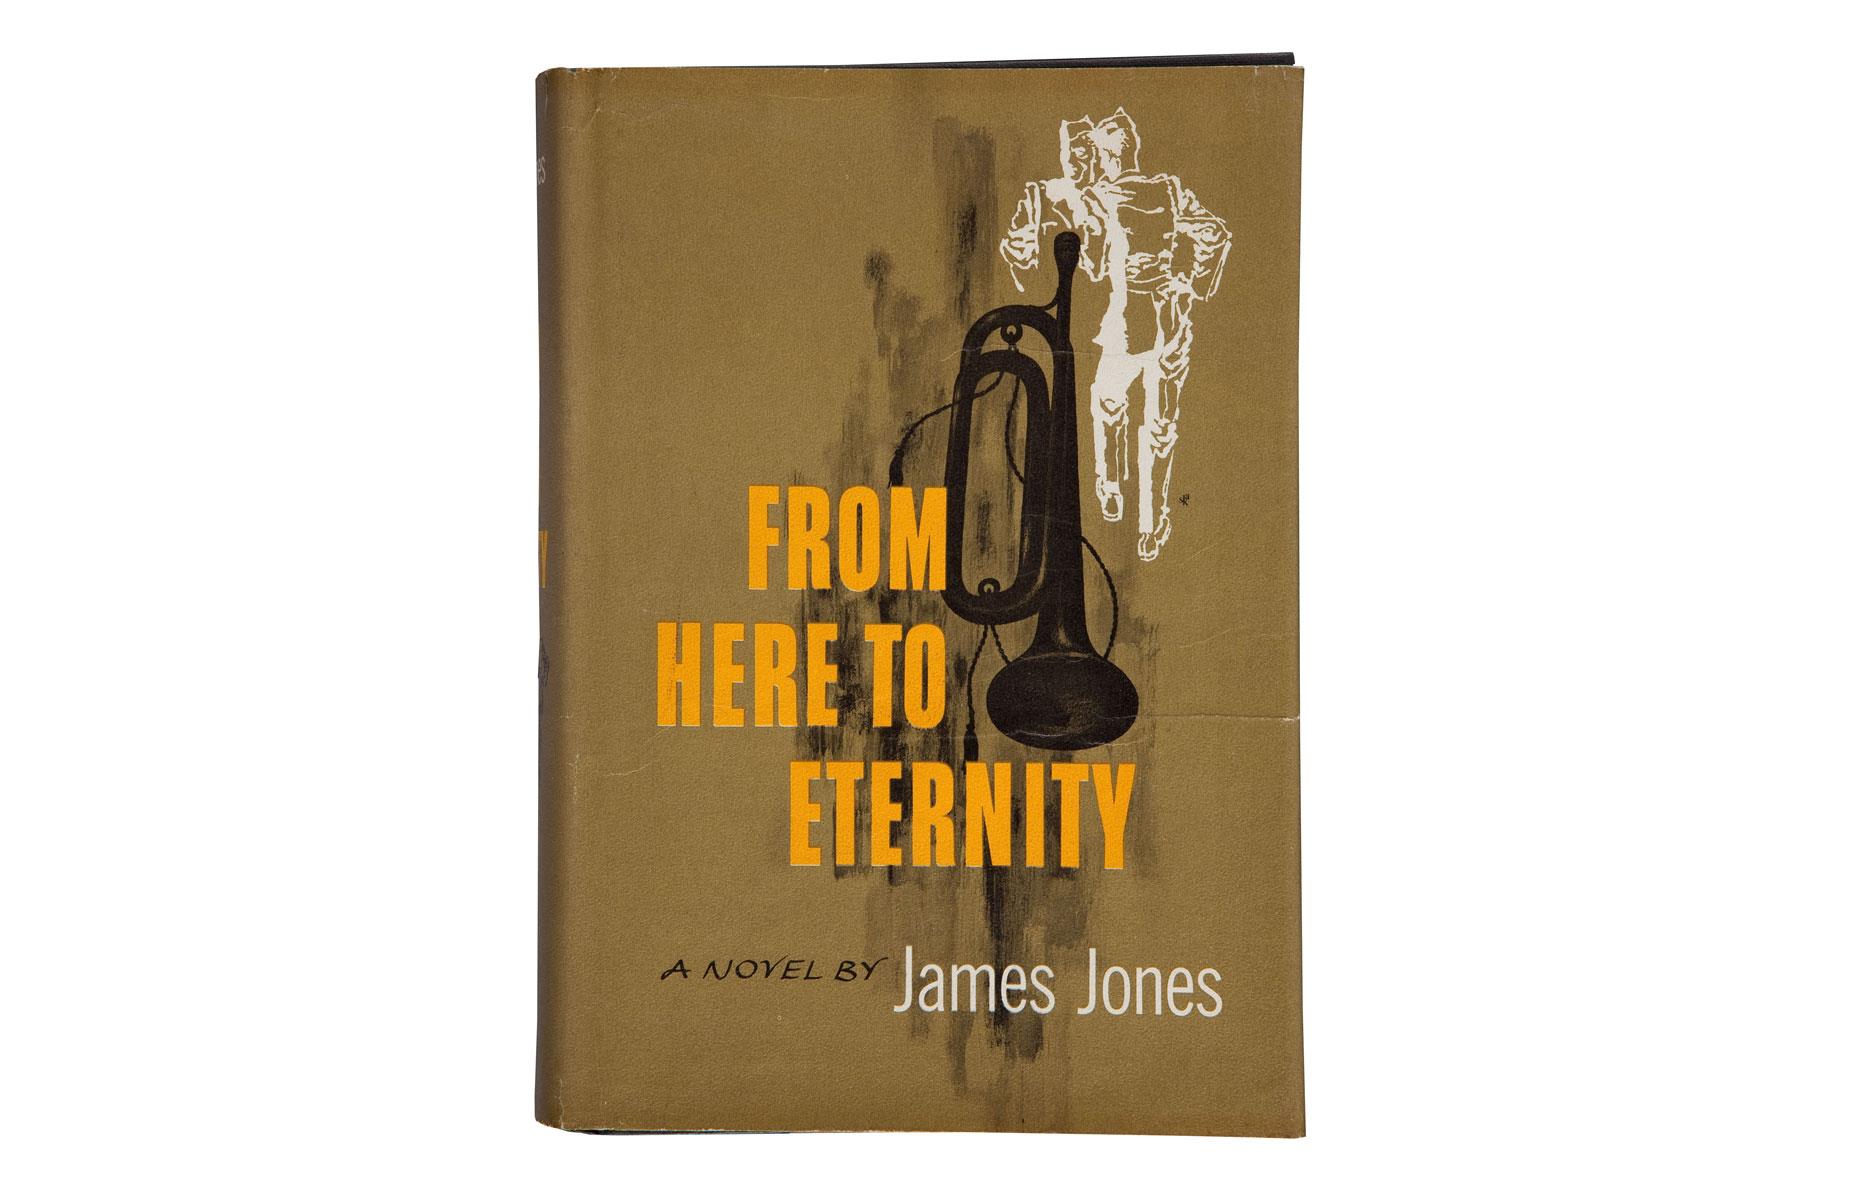 1950s: From Here to Eternity by James Jones